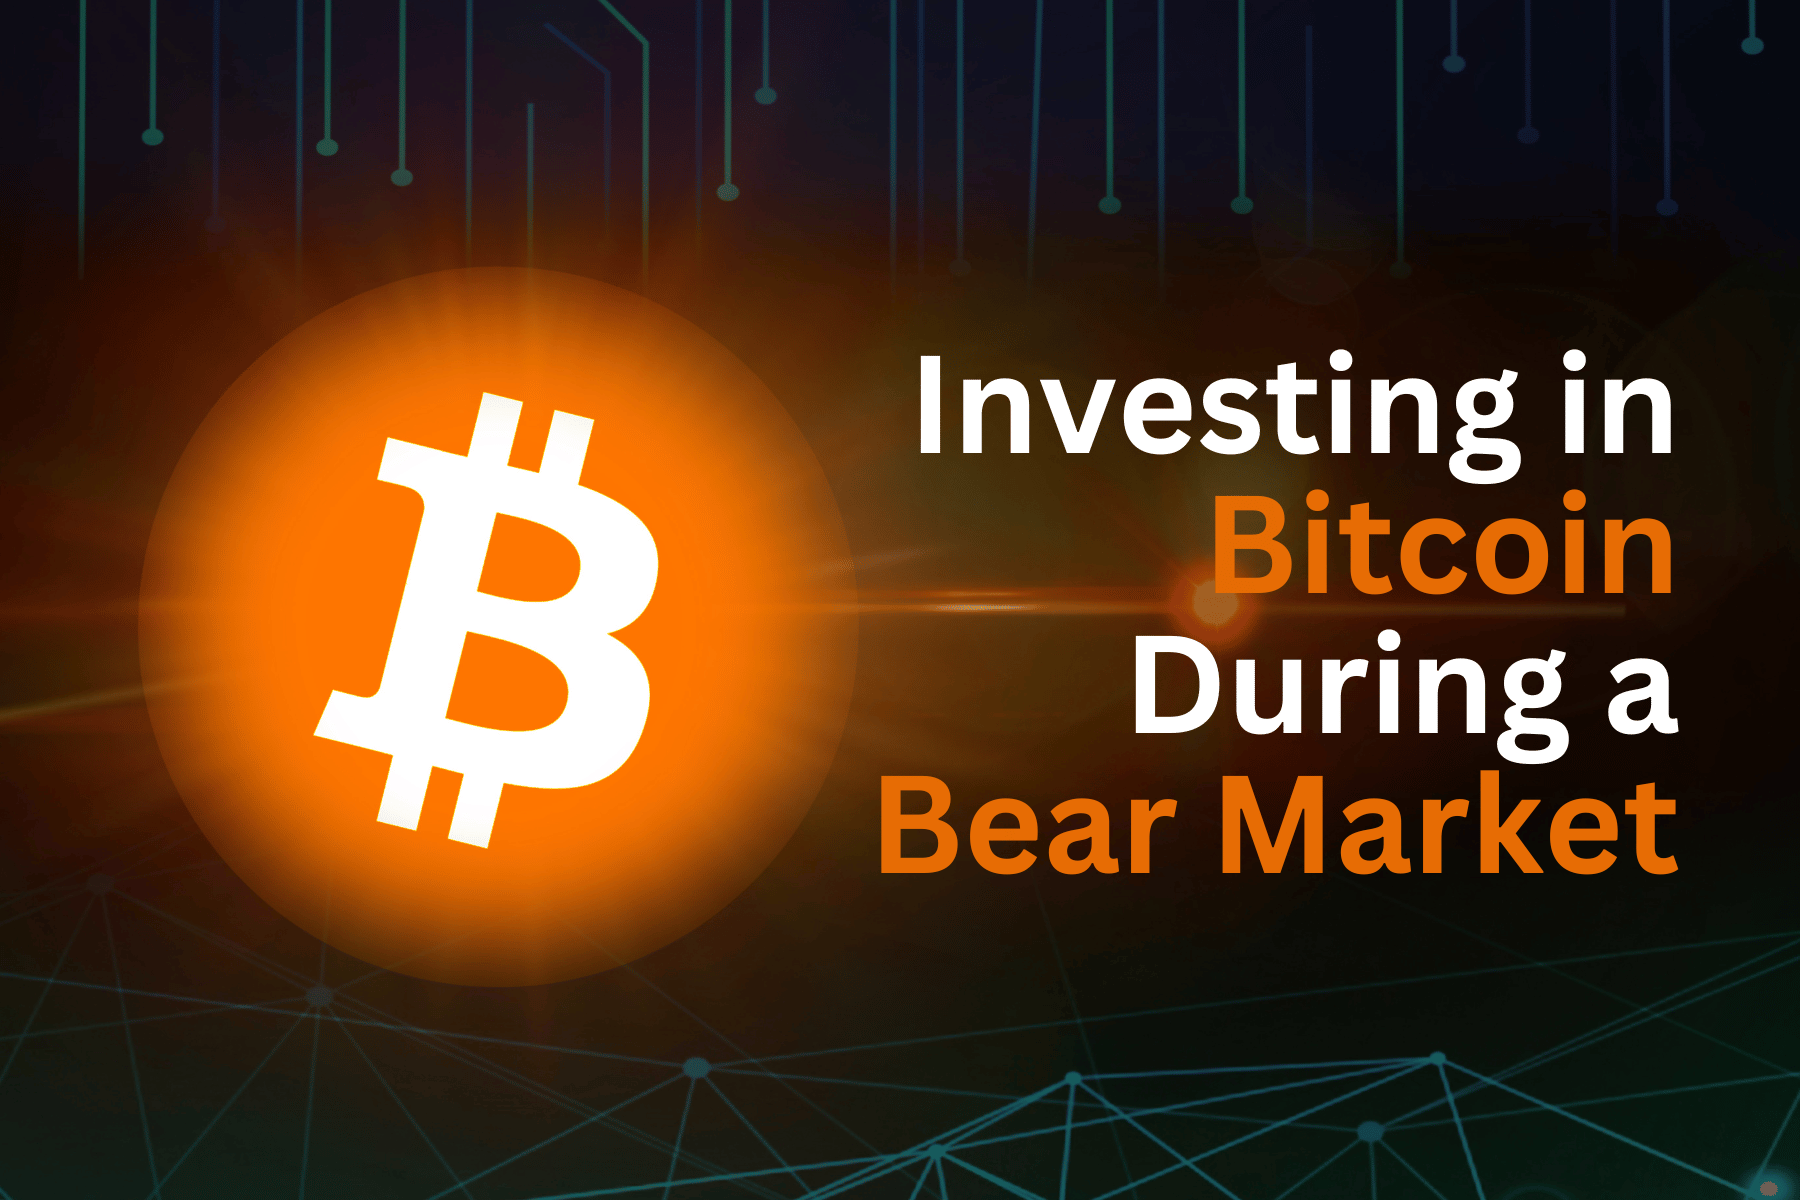 Investing in Bitcoin During a Bear Market